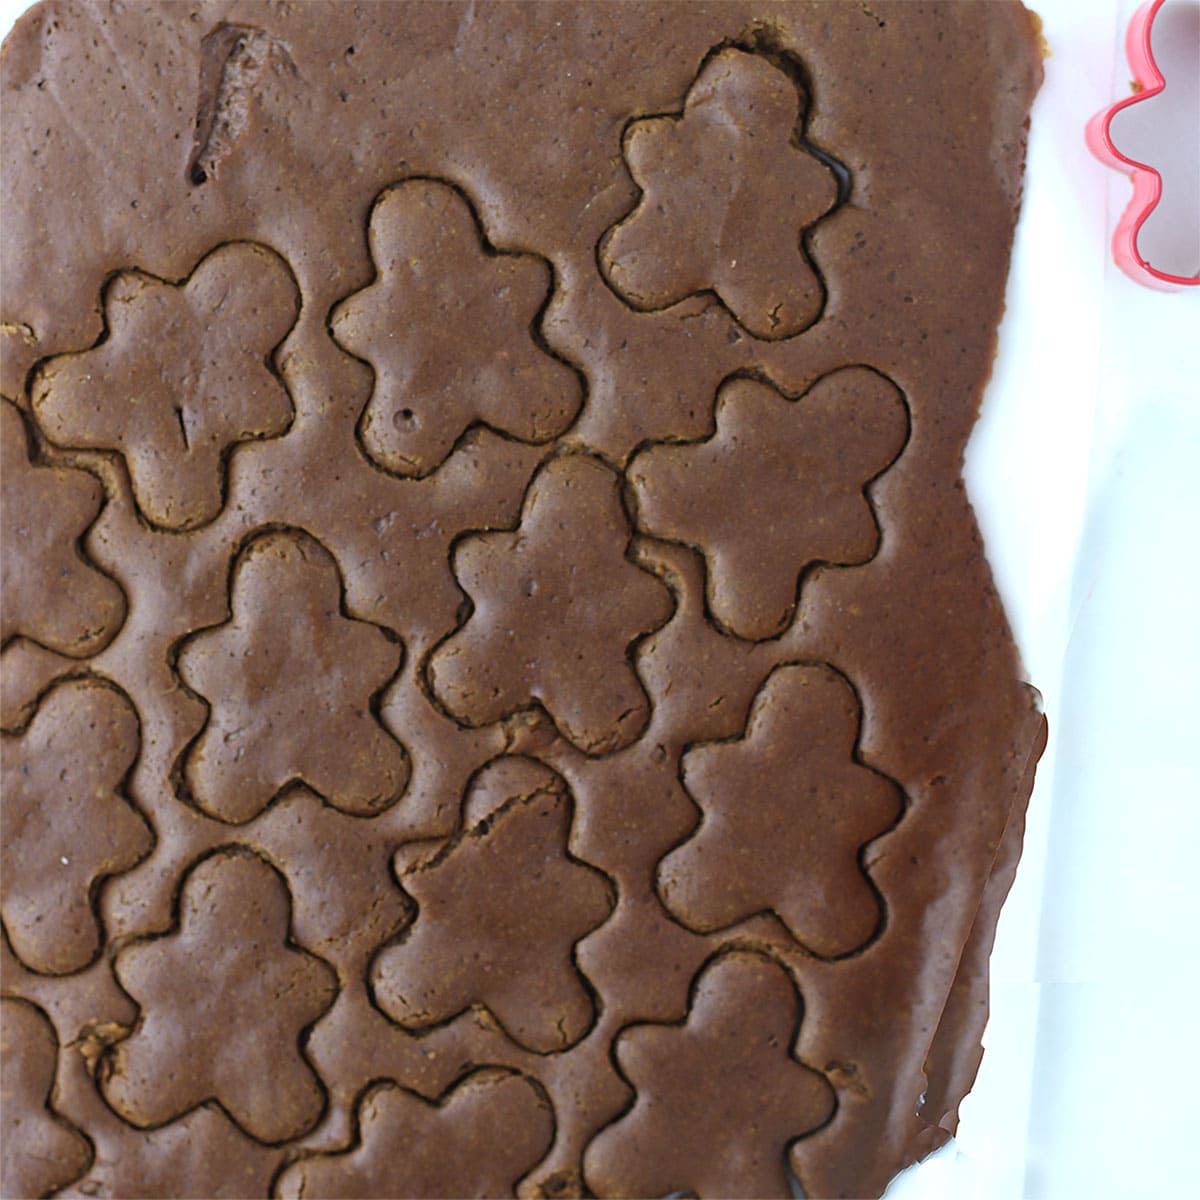 gingerbread dough is cut out.